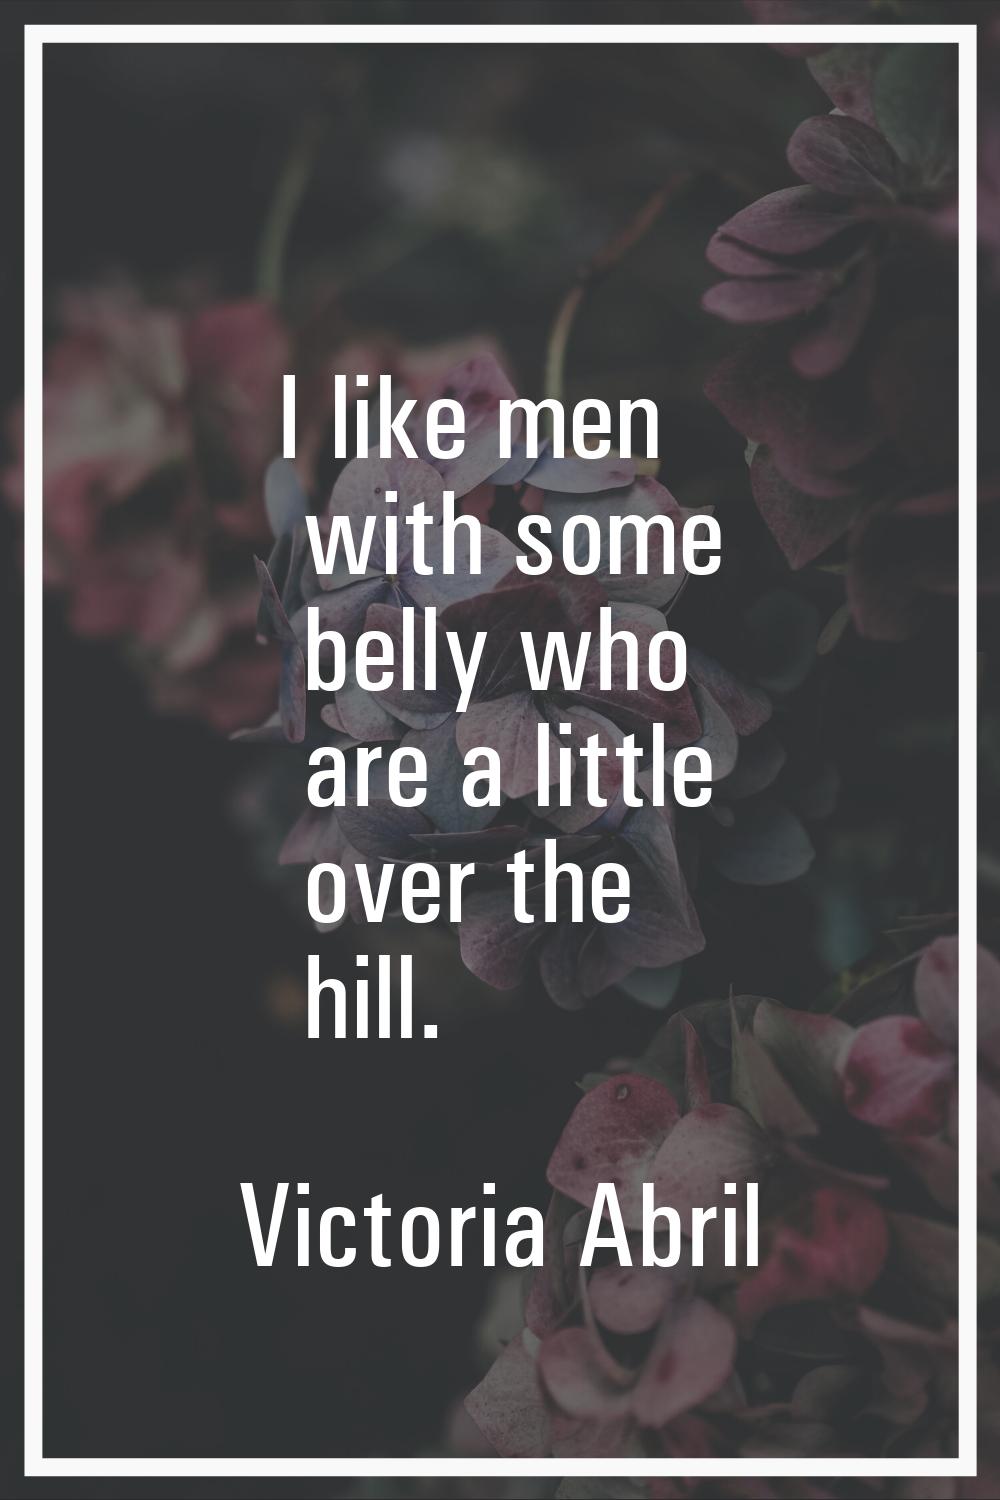 I like men with some belly who are a little over the hill.